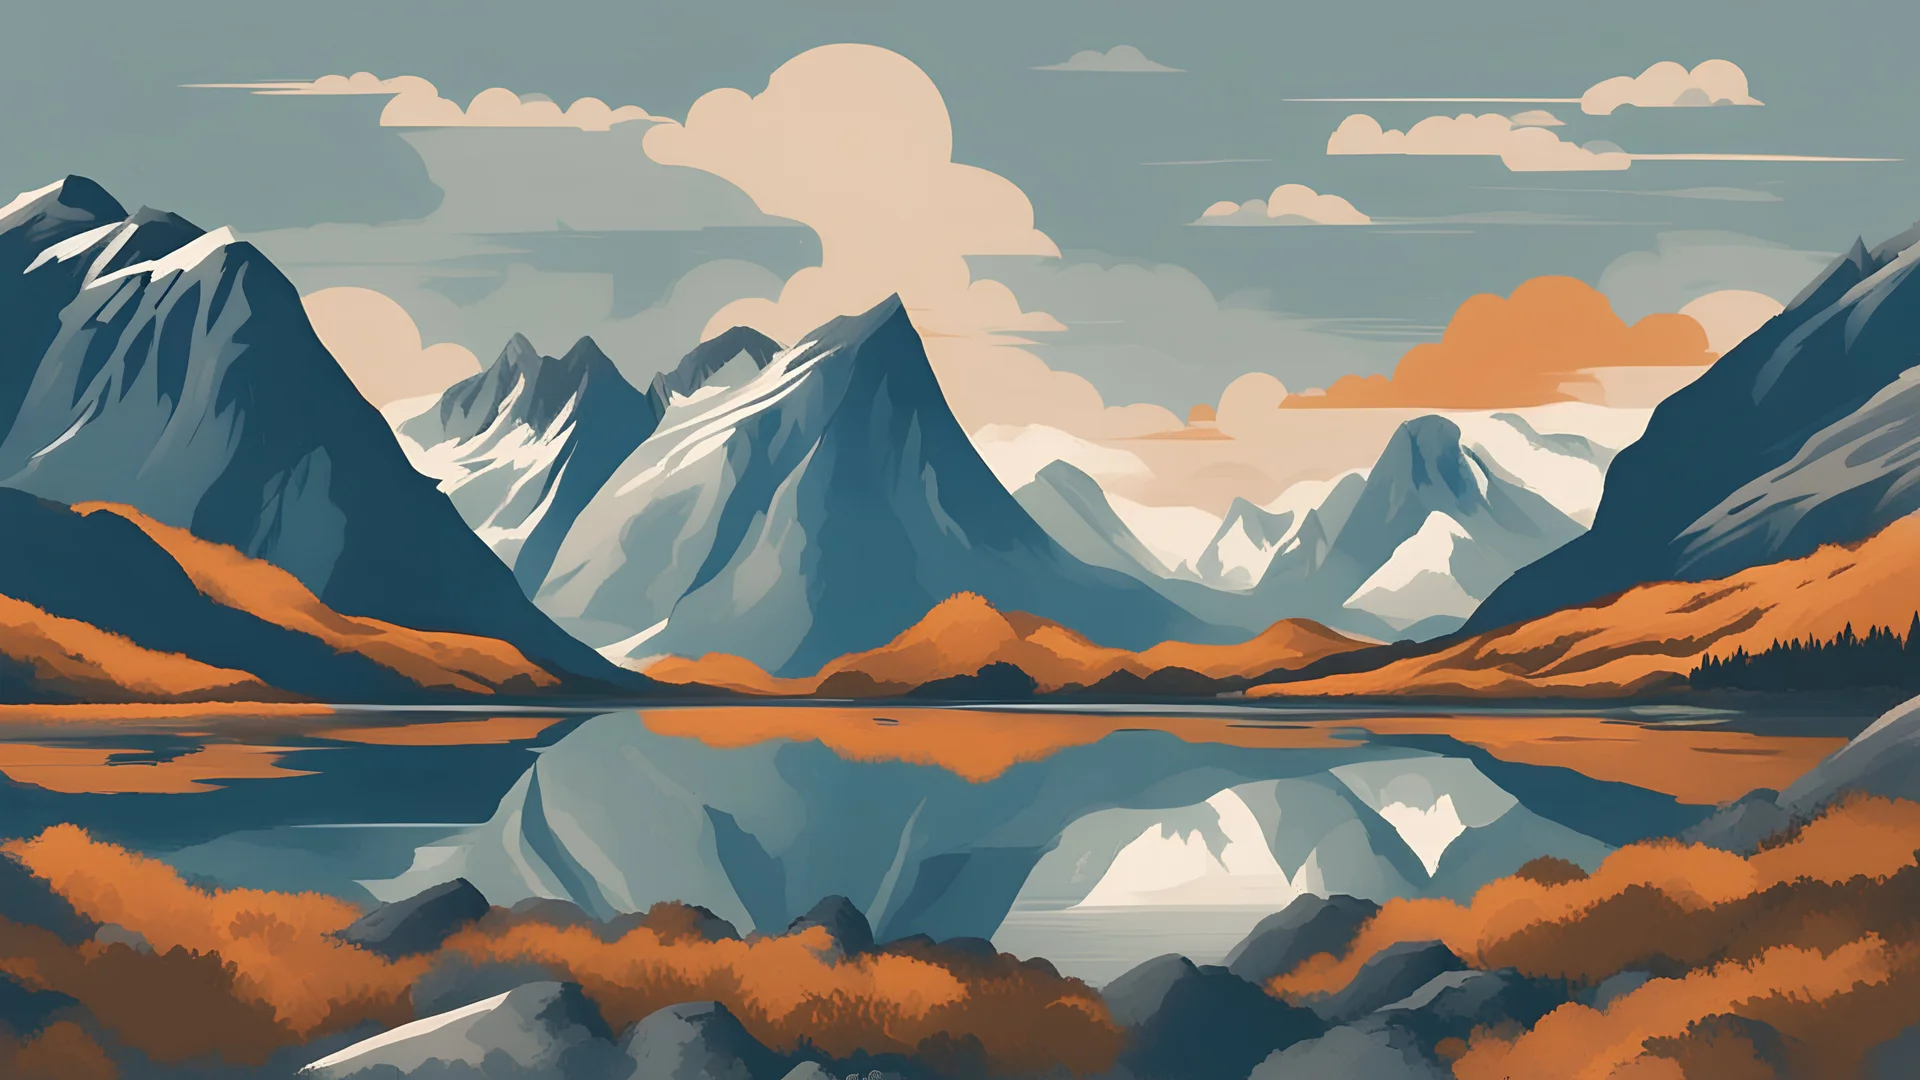 Norwegian fjord mountains desktop background image beautiful vintage poster in the style of USA national park posters clouds colorful graphic design based on Lofoten small fishing community browns oranges in hills blues and whites in sky grey and blues in mountains